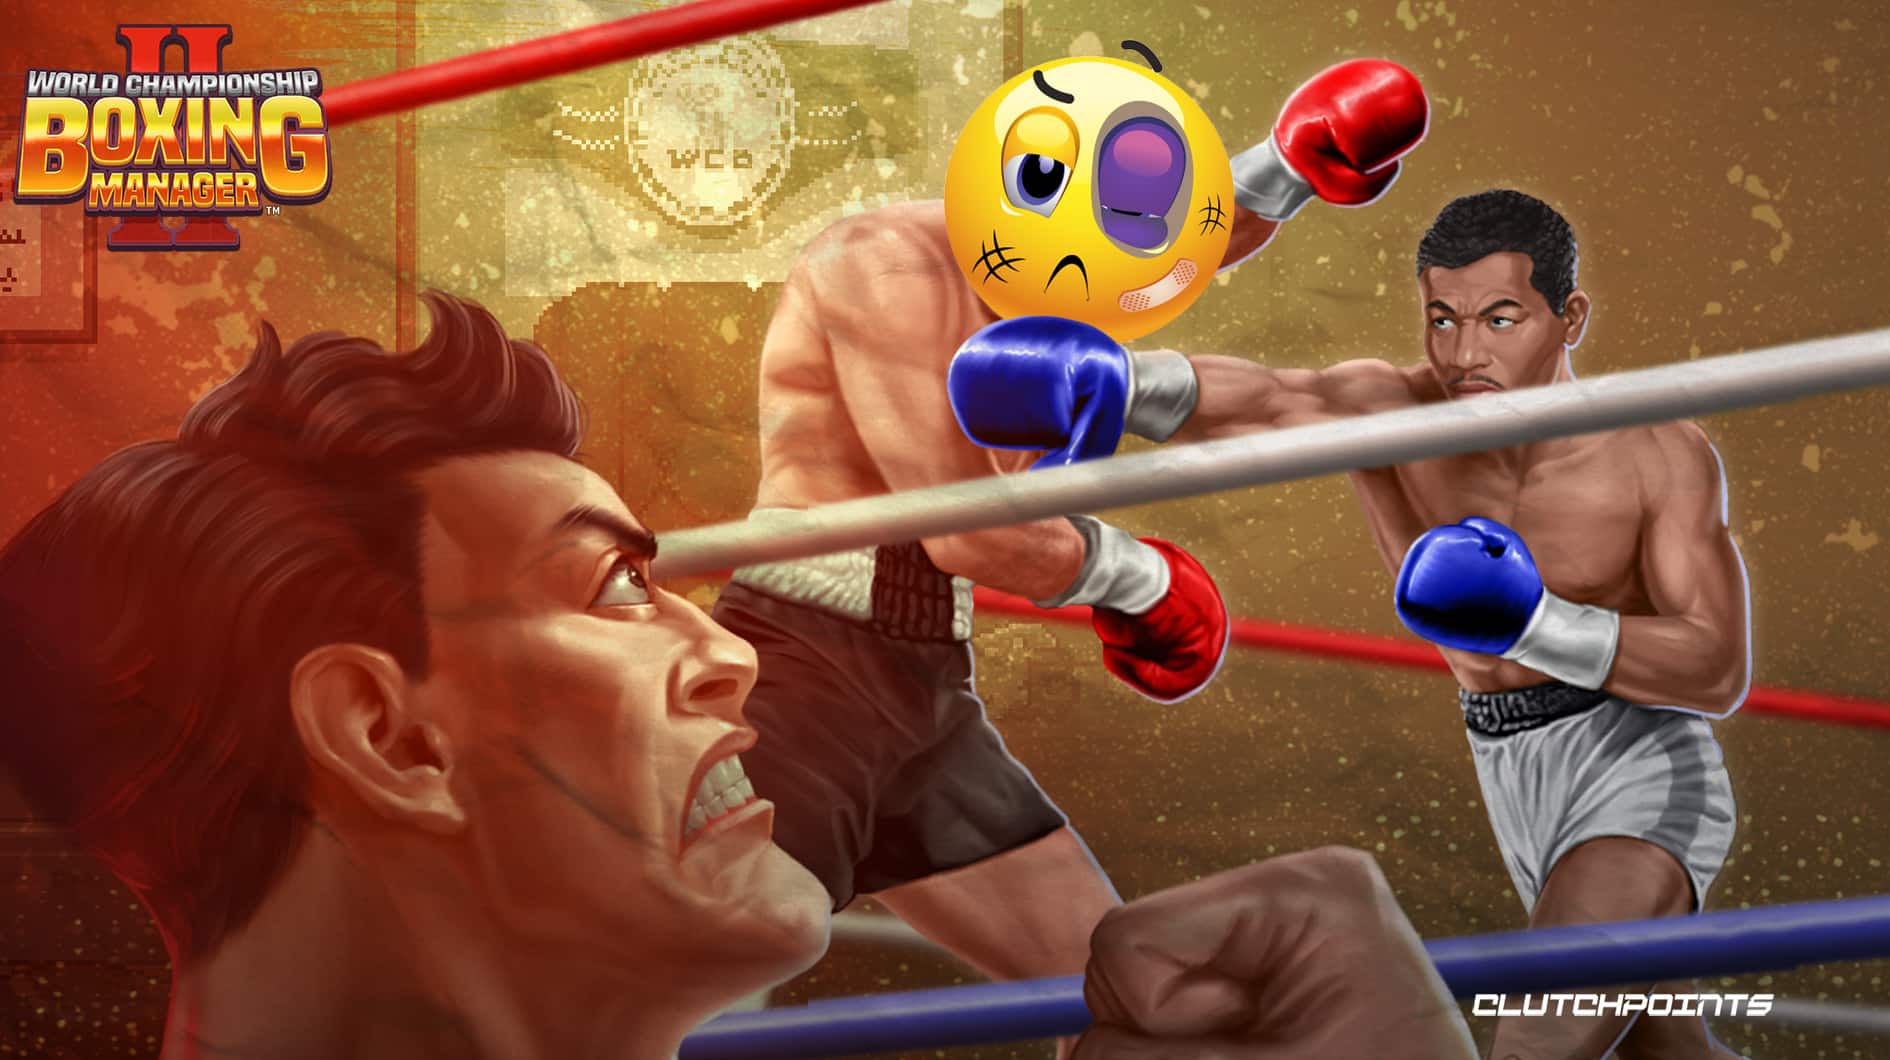 World Championship Boxing Manager 2 review: Floats like a butterfly, but  doesn't sting like a bee